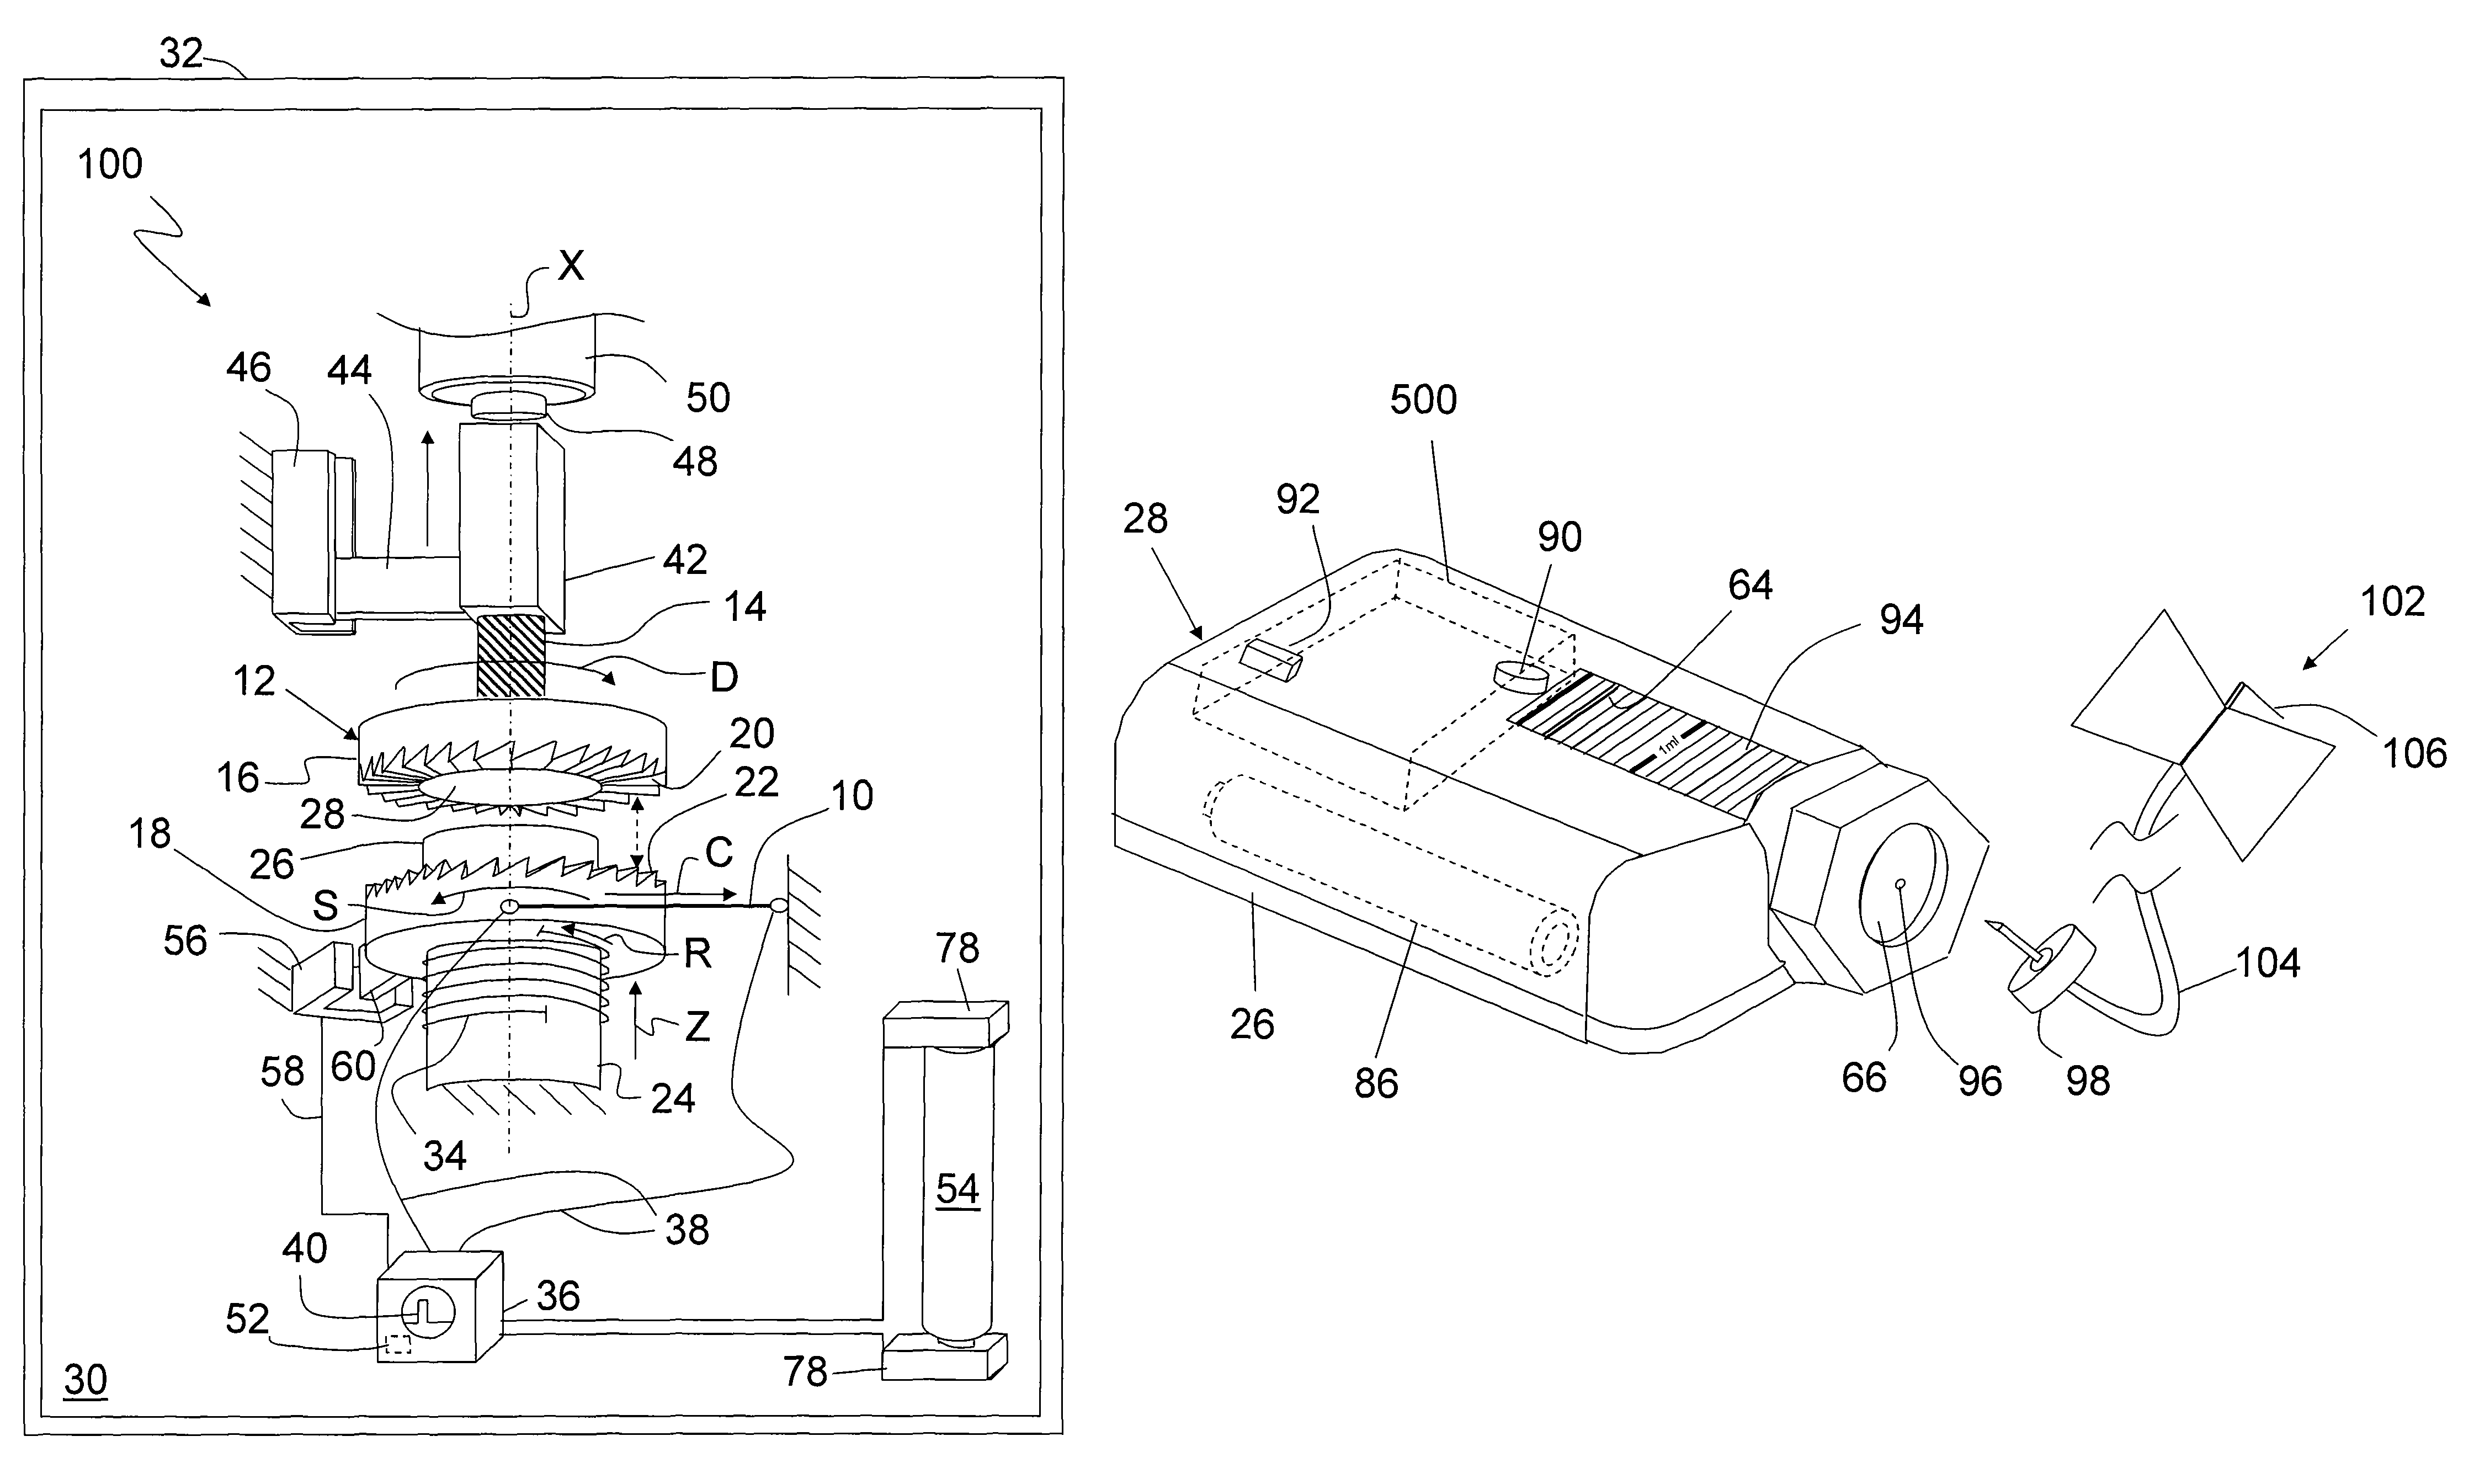 Lead screw delivery device using reusable shape memory actuator drive